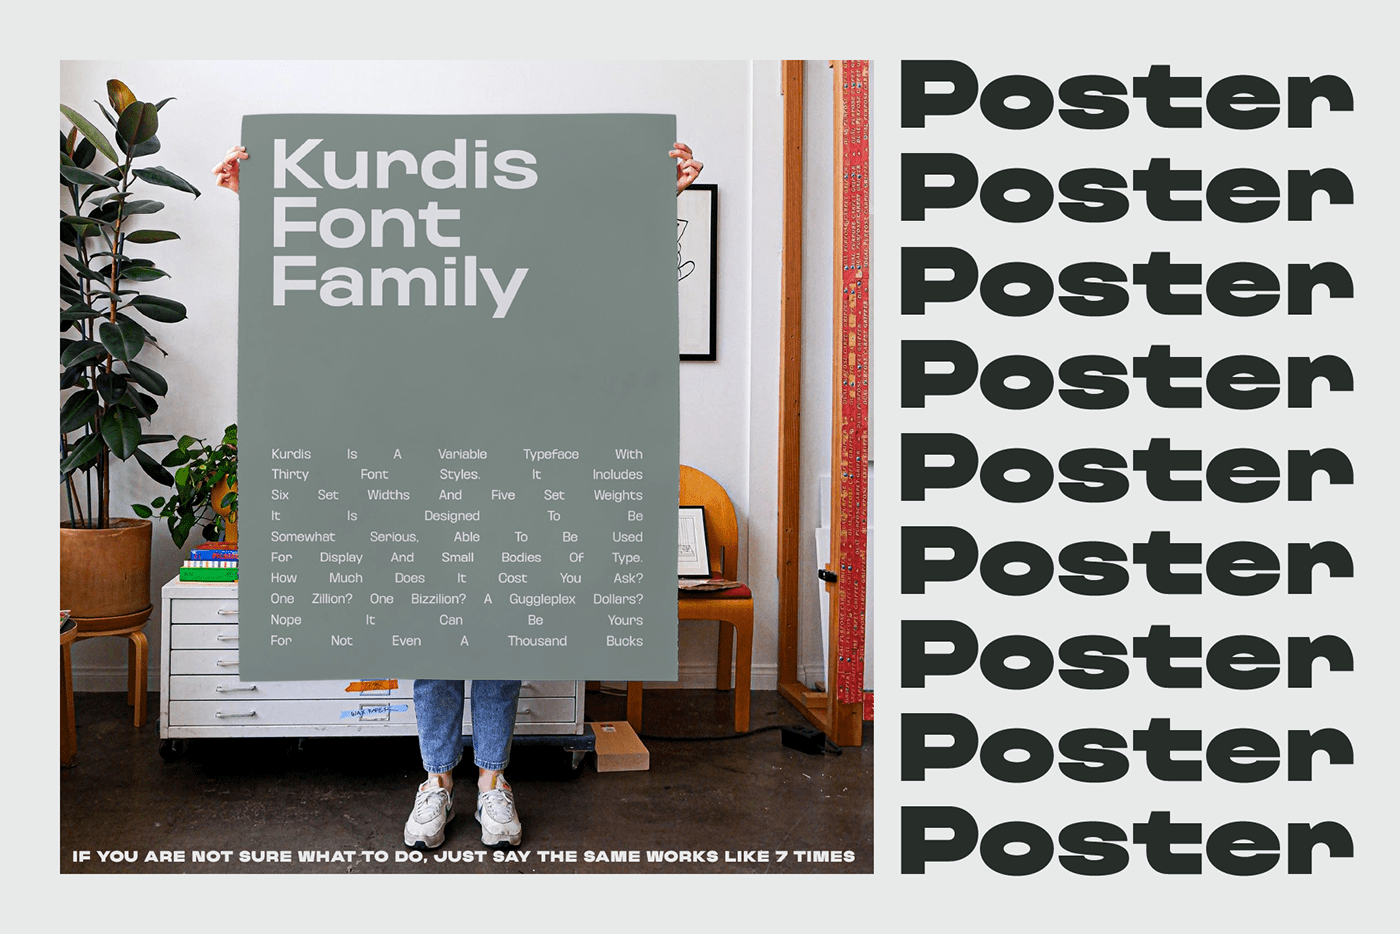 a poster showing of kurdis font family